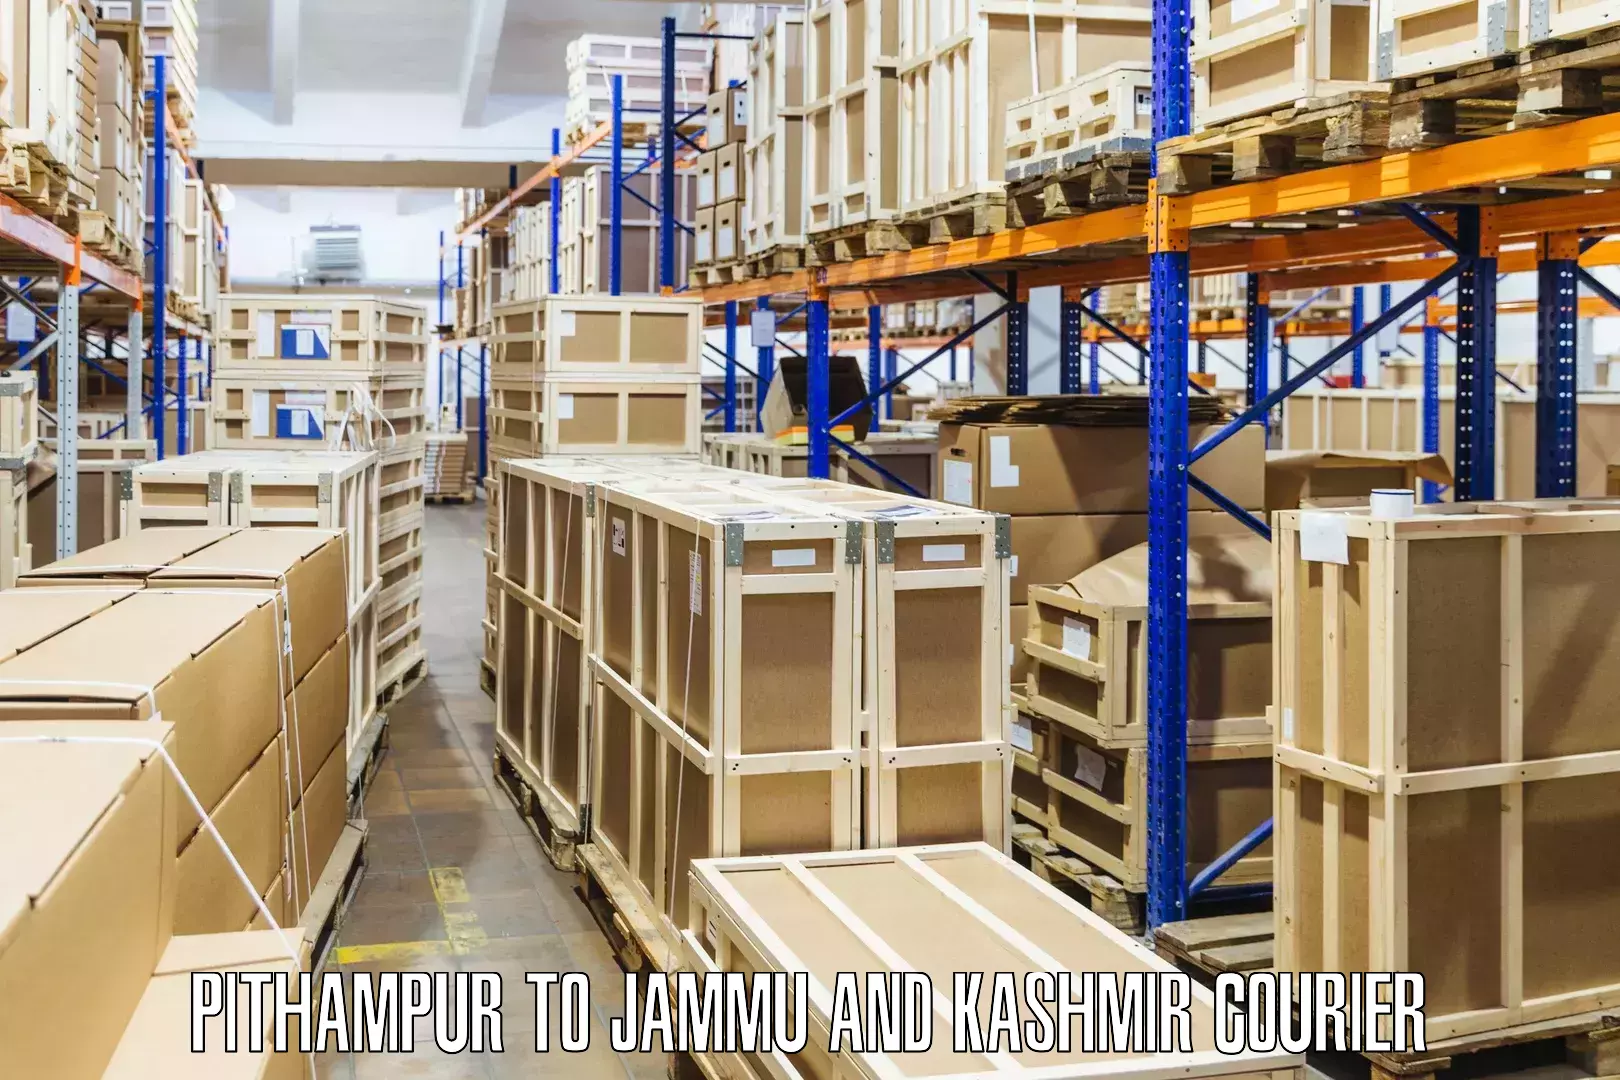 Reliable shipping partners Pithampur to Jammu and Kashmir